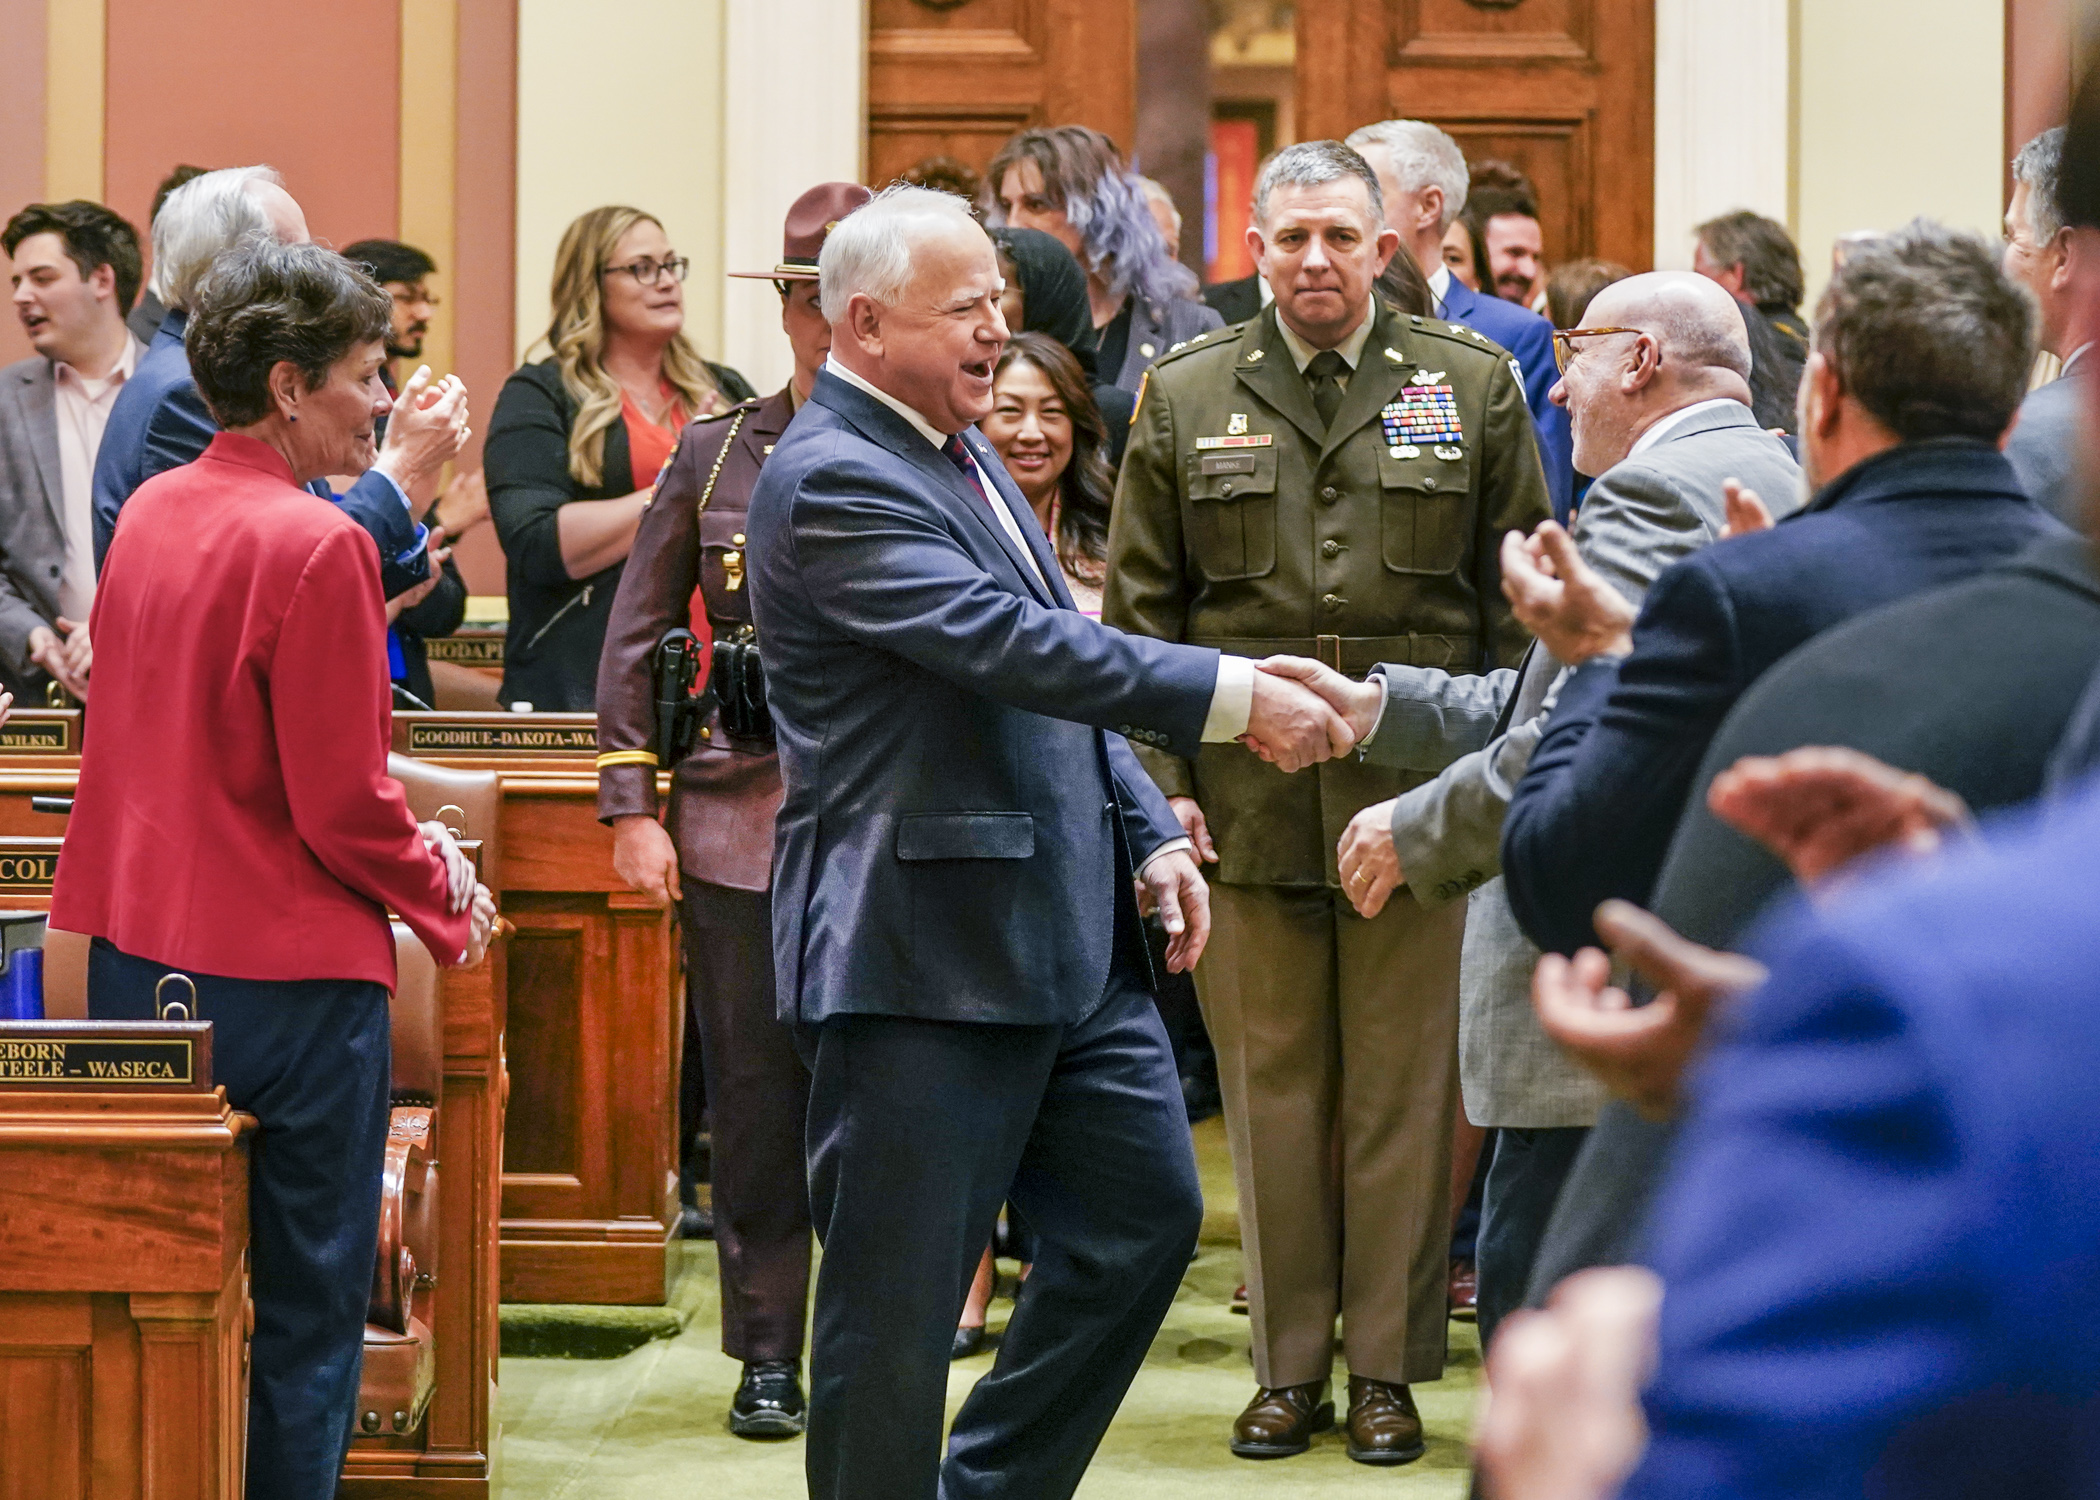 Gov. Tim Walz shakes the hand of Rep. Frank Hornstein as he makes his way into the House Chamber to deliver the State of the State address April 19. (Photo by Catherine Davis)